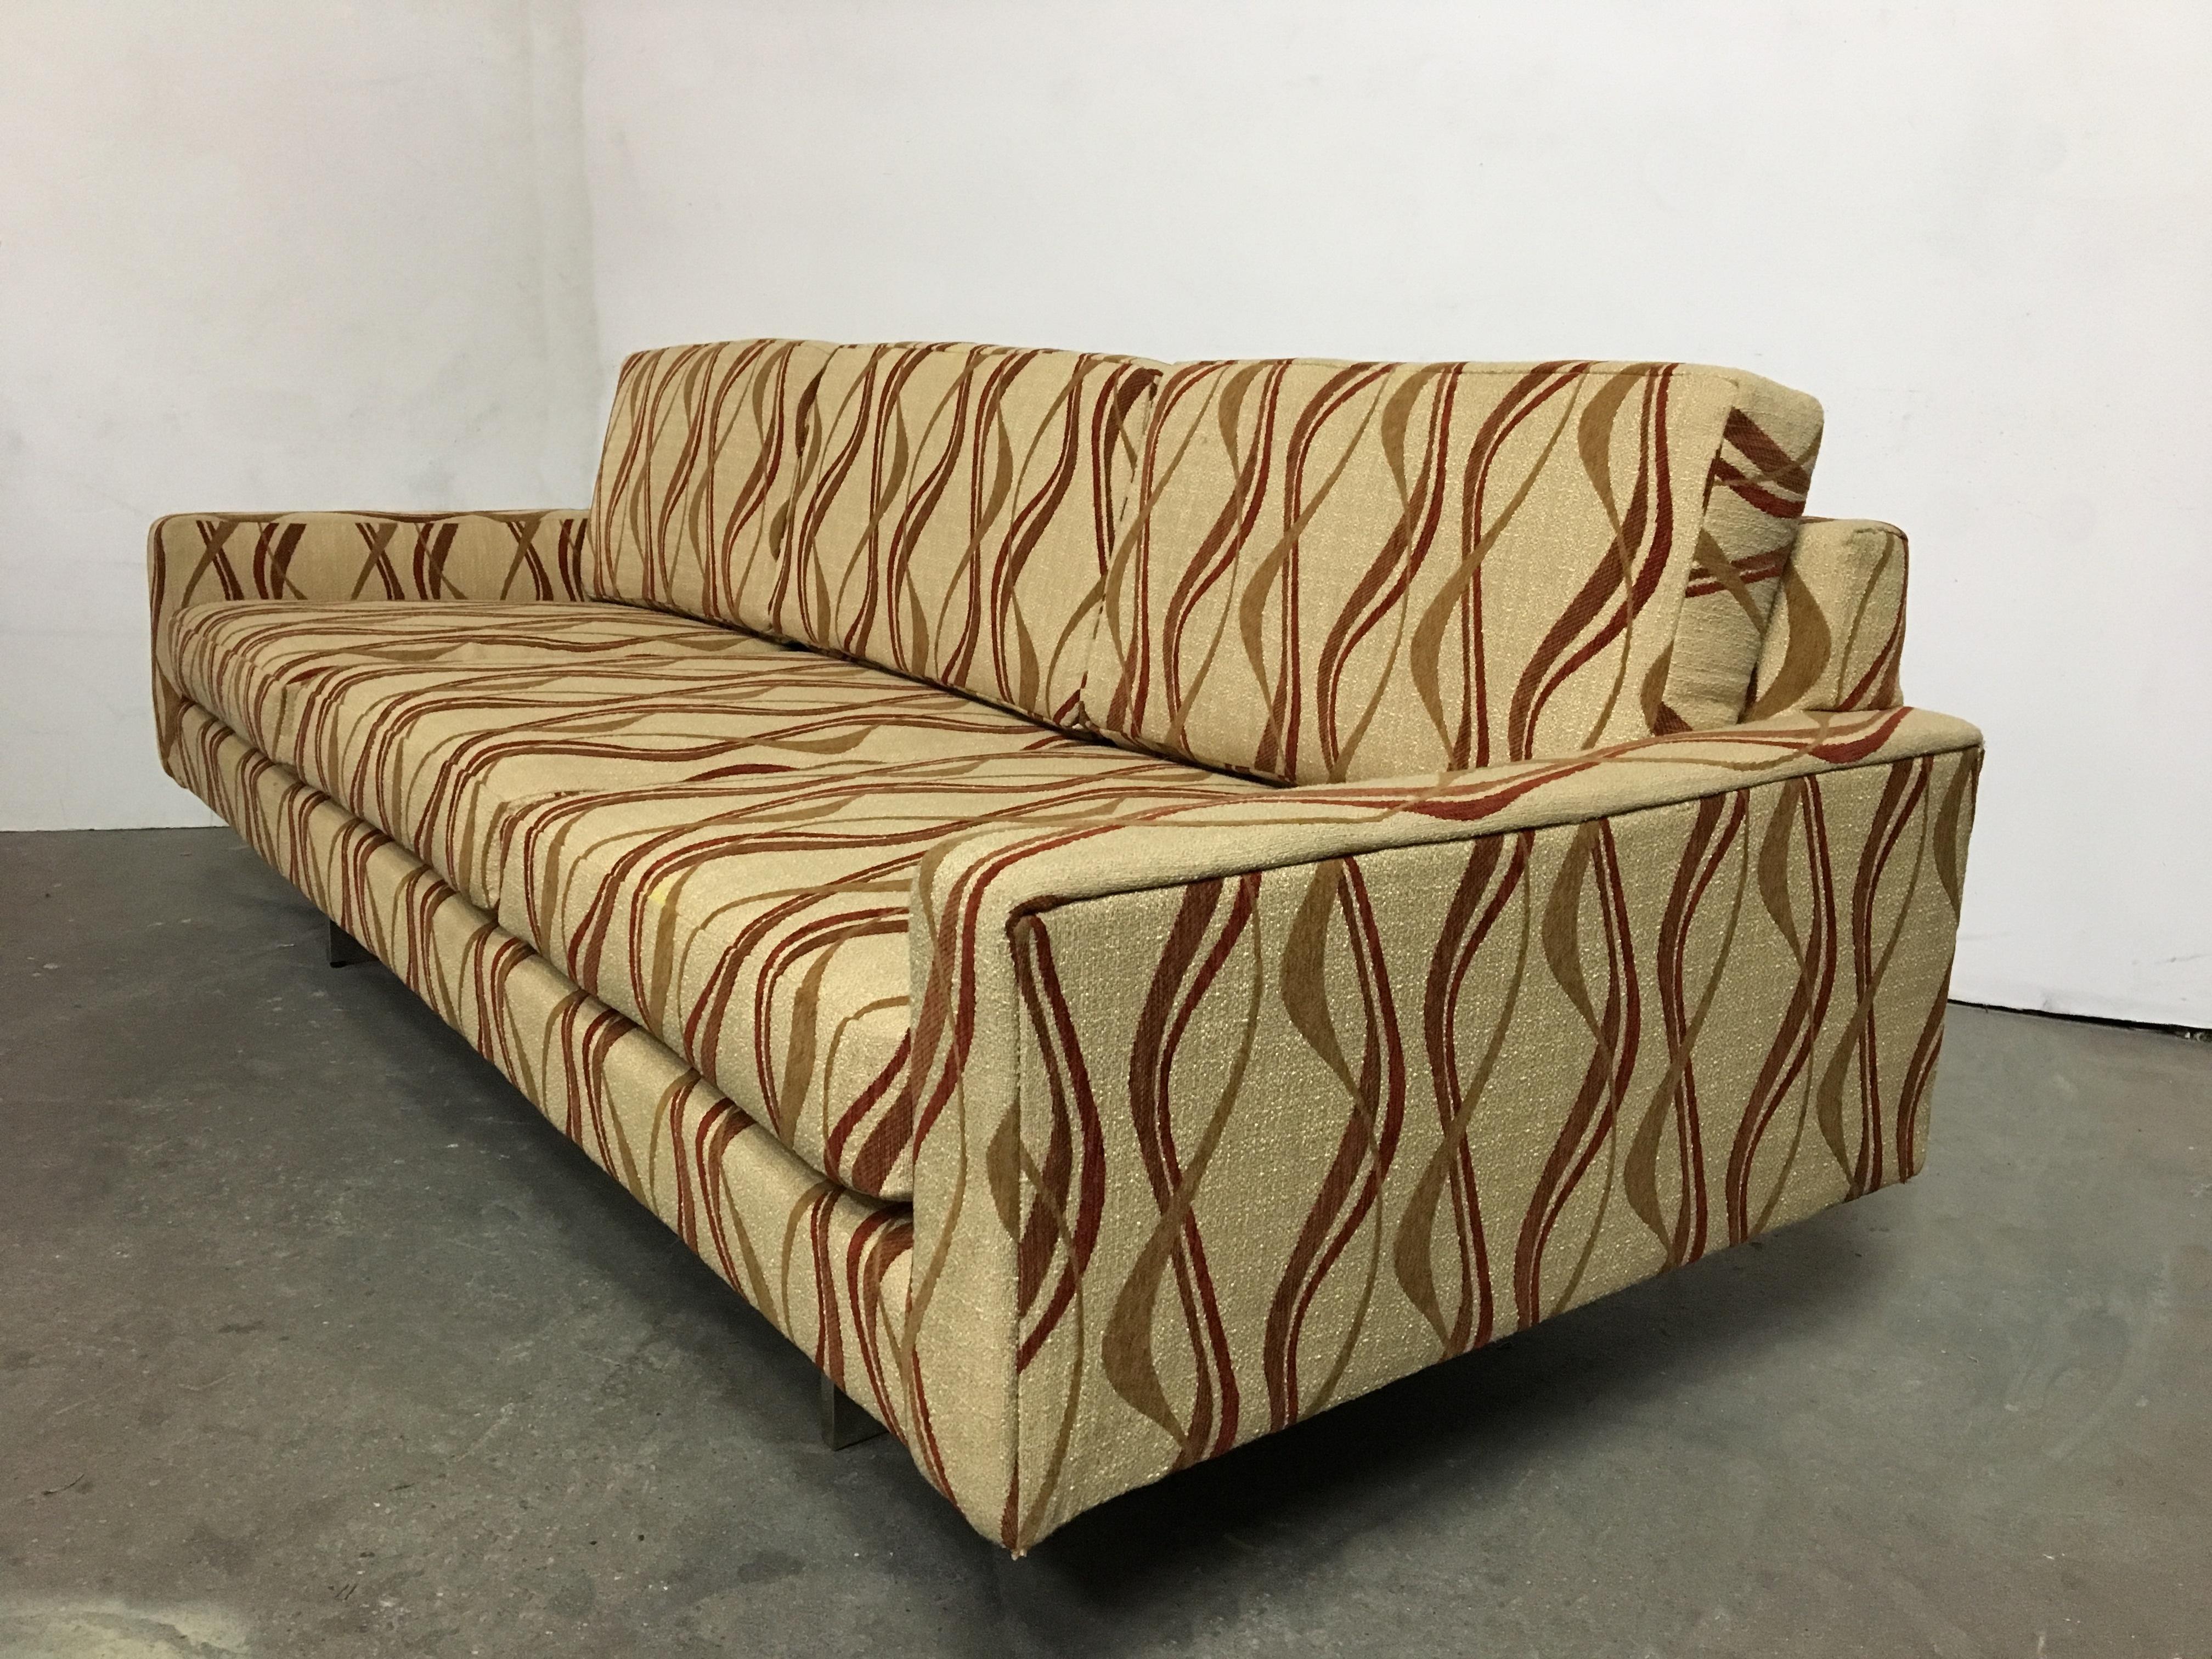 Chrome base 1970s Tuxedo sofa reupholstered in the manner of Milo Baughman reupholstered in a playful fabric.